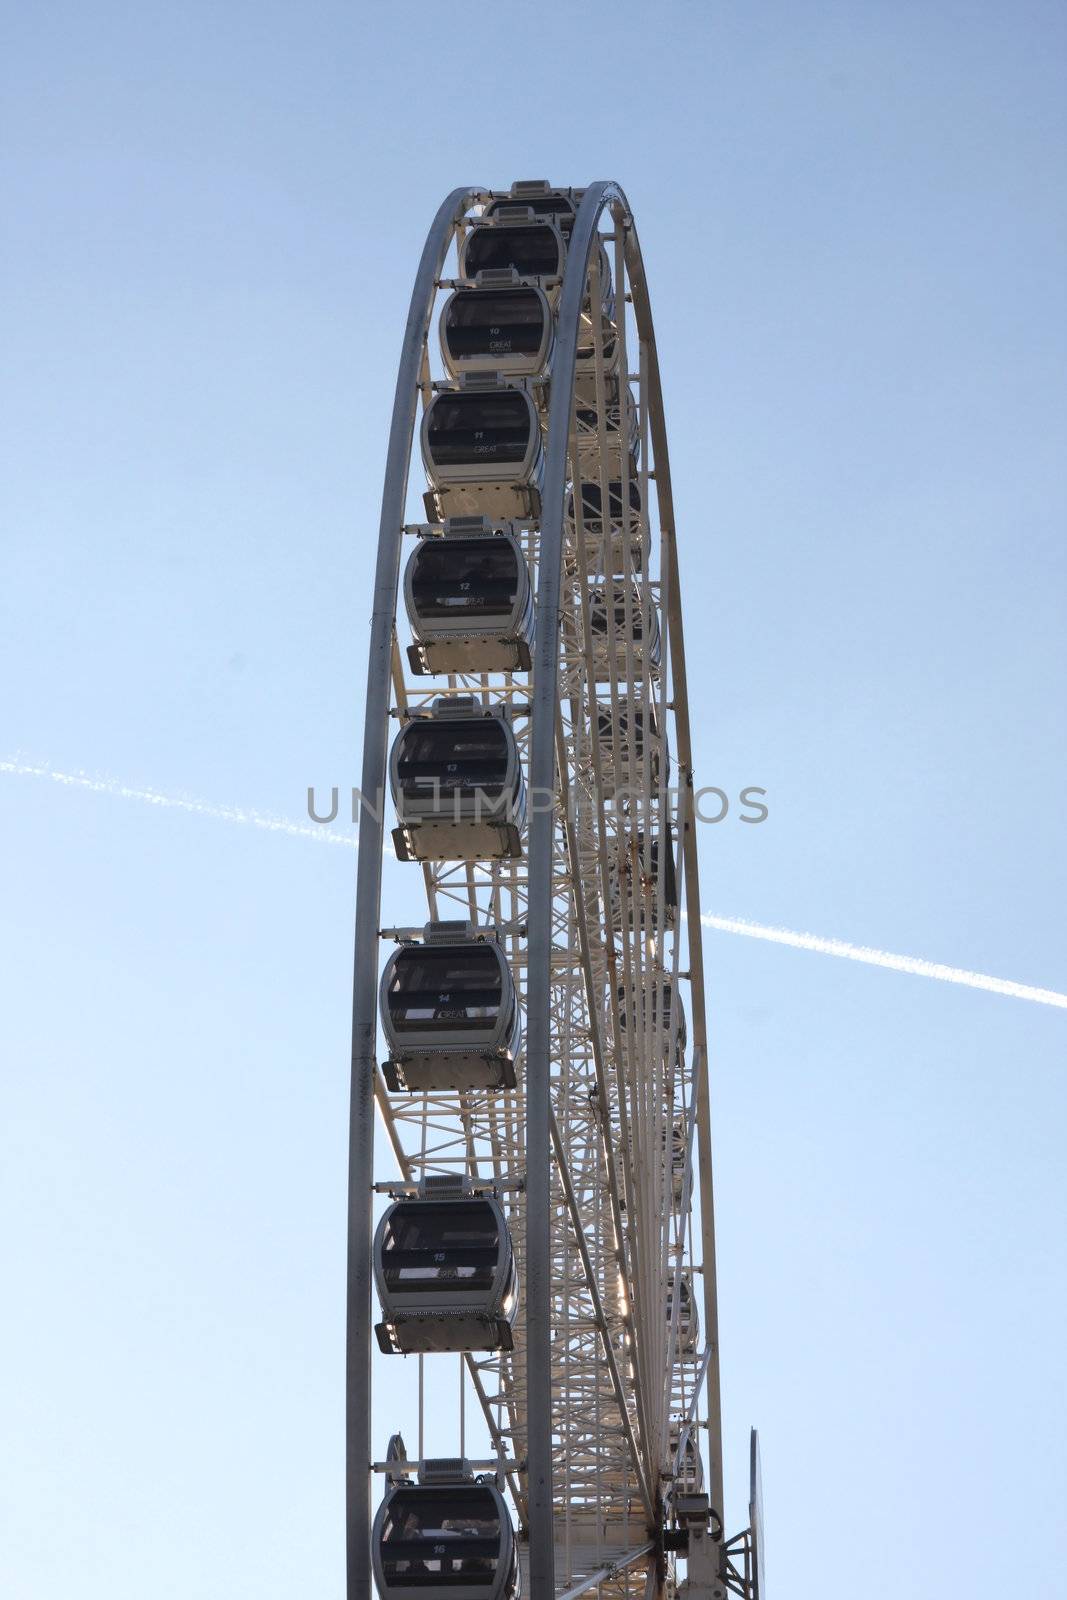 Manchester eye, big wheel in the city centre of Manchester England